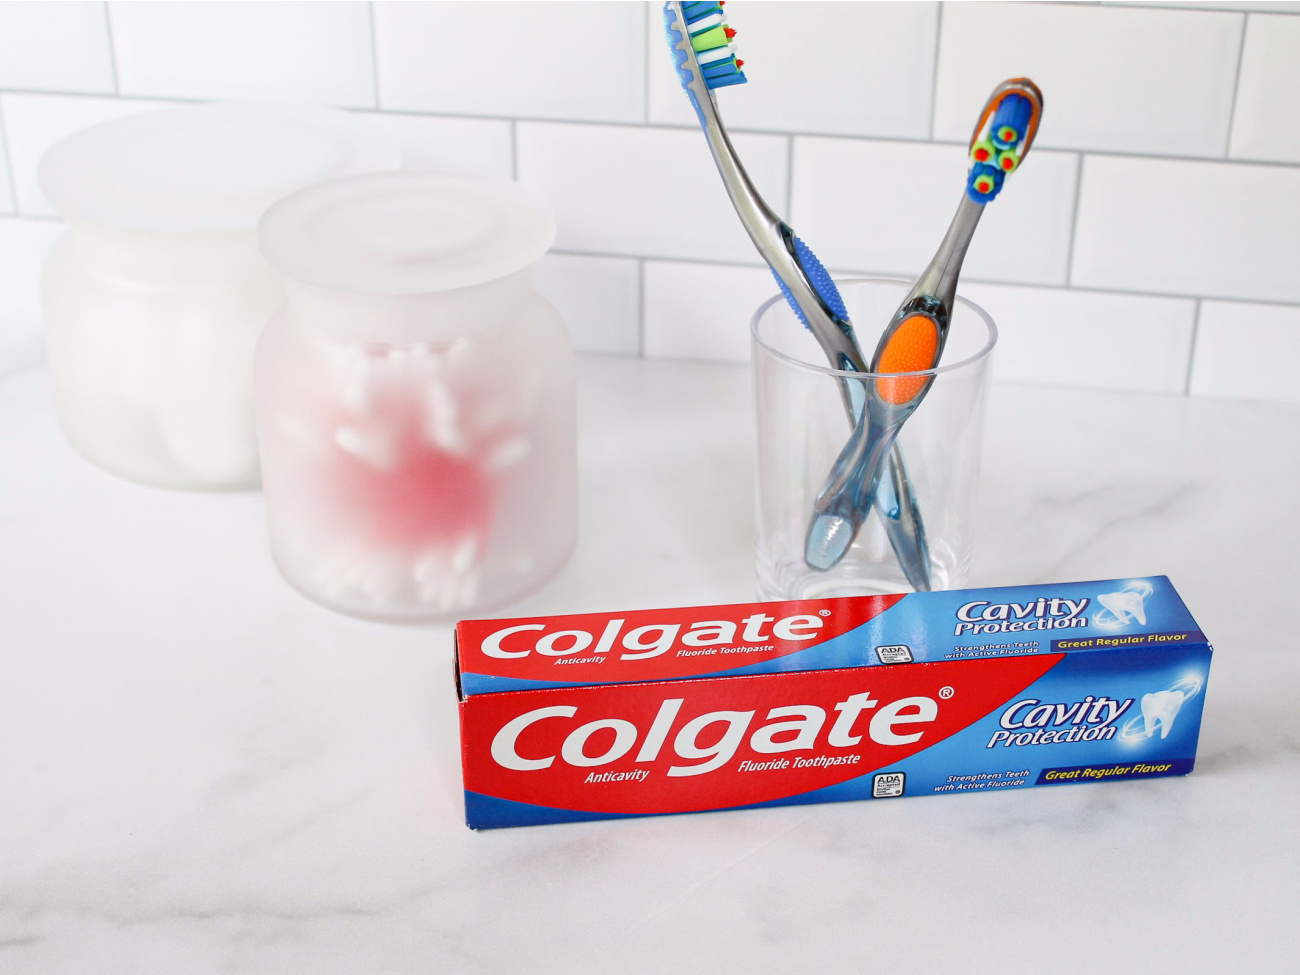 Colgate Toothpaste Only $1 At Publix